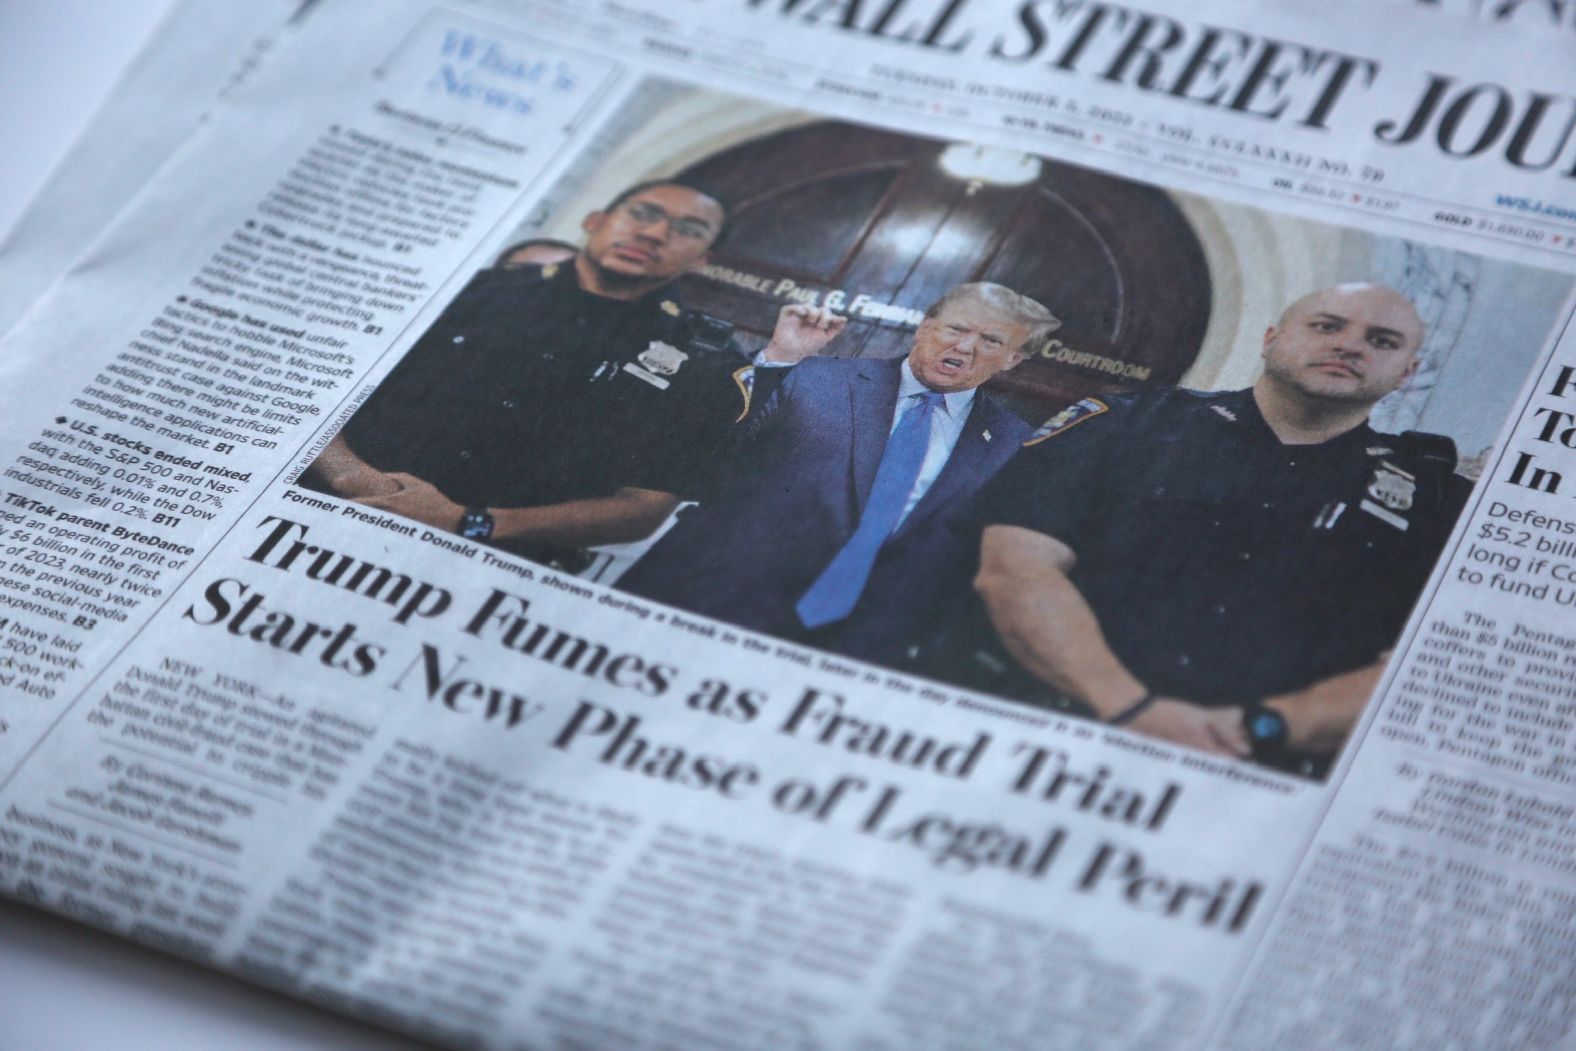 Coverage of the trial is seen on the front page of the Wall Street Journal on October 3.